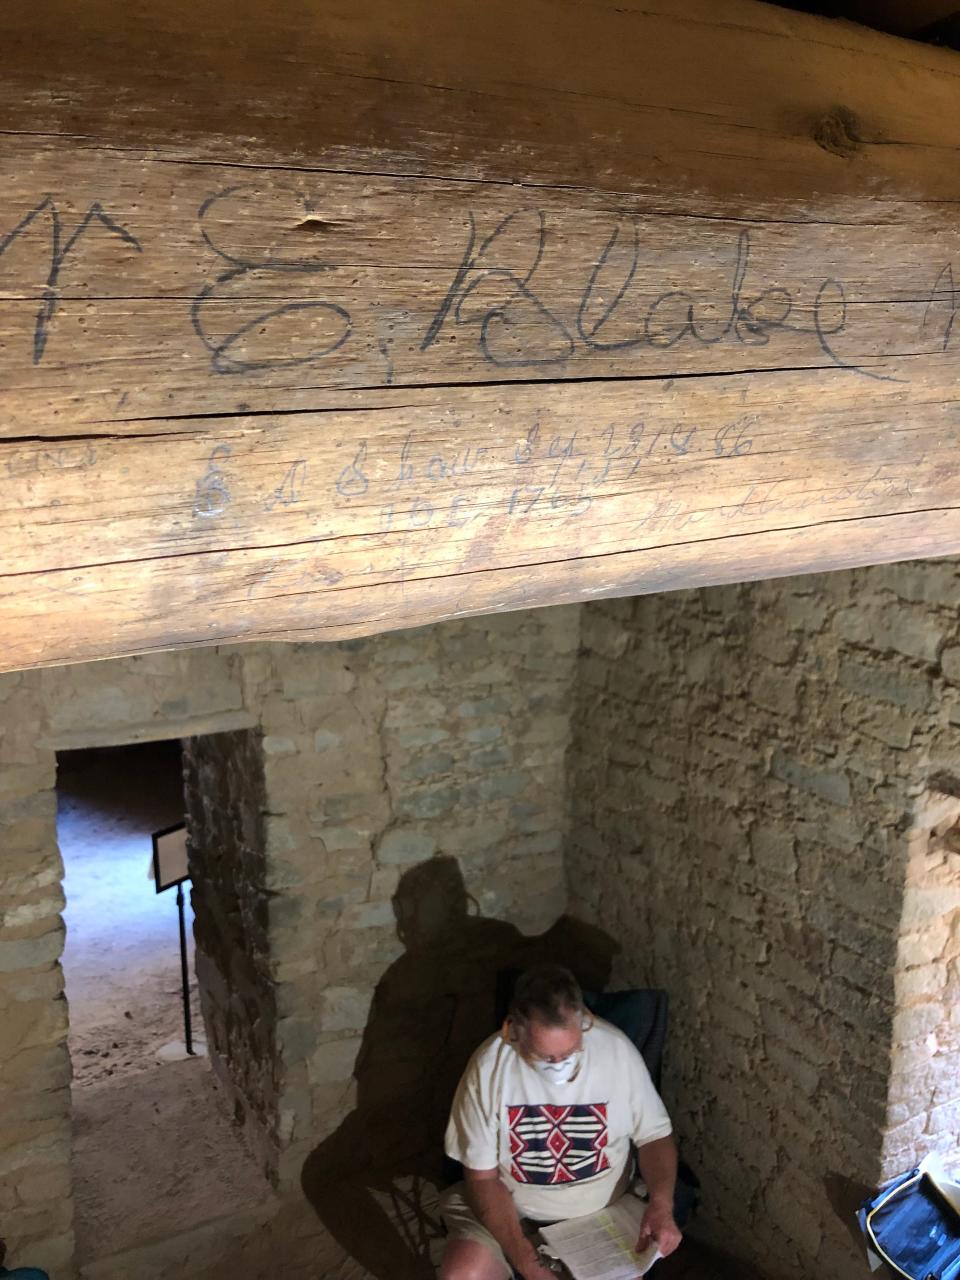 Fred Blackburn sits under a viga in a room at Aztec Ruins National Monument that was inscribed with the signatures of several early-day visitors to the site.